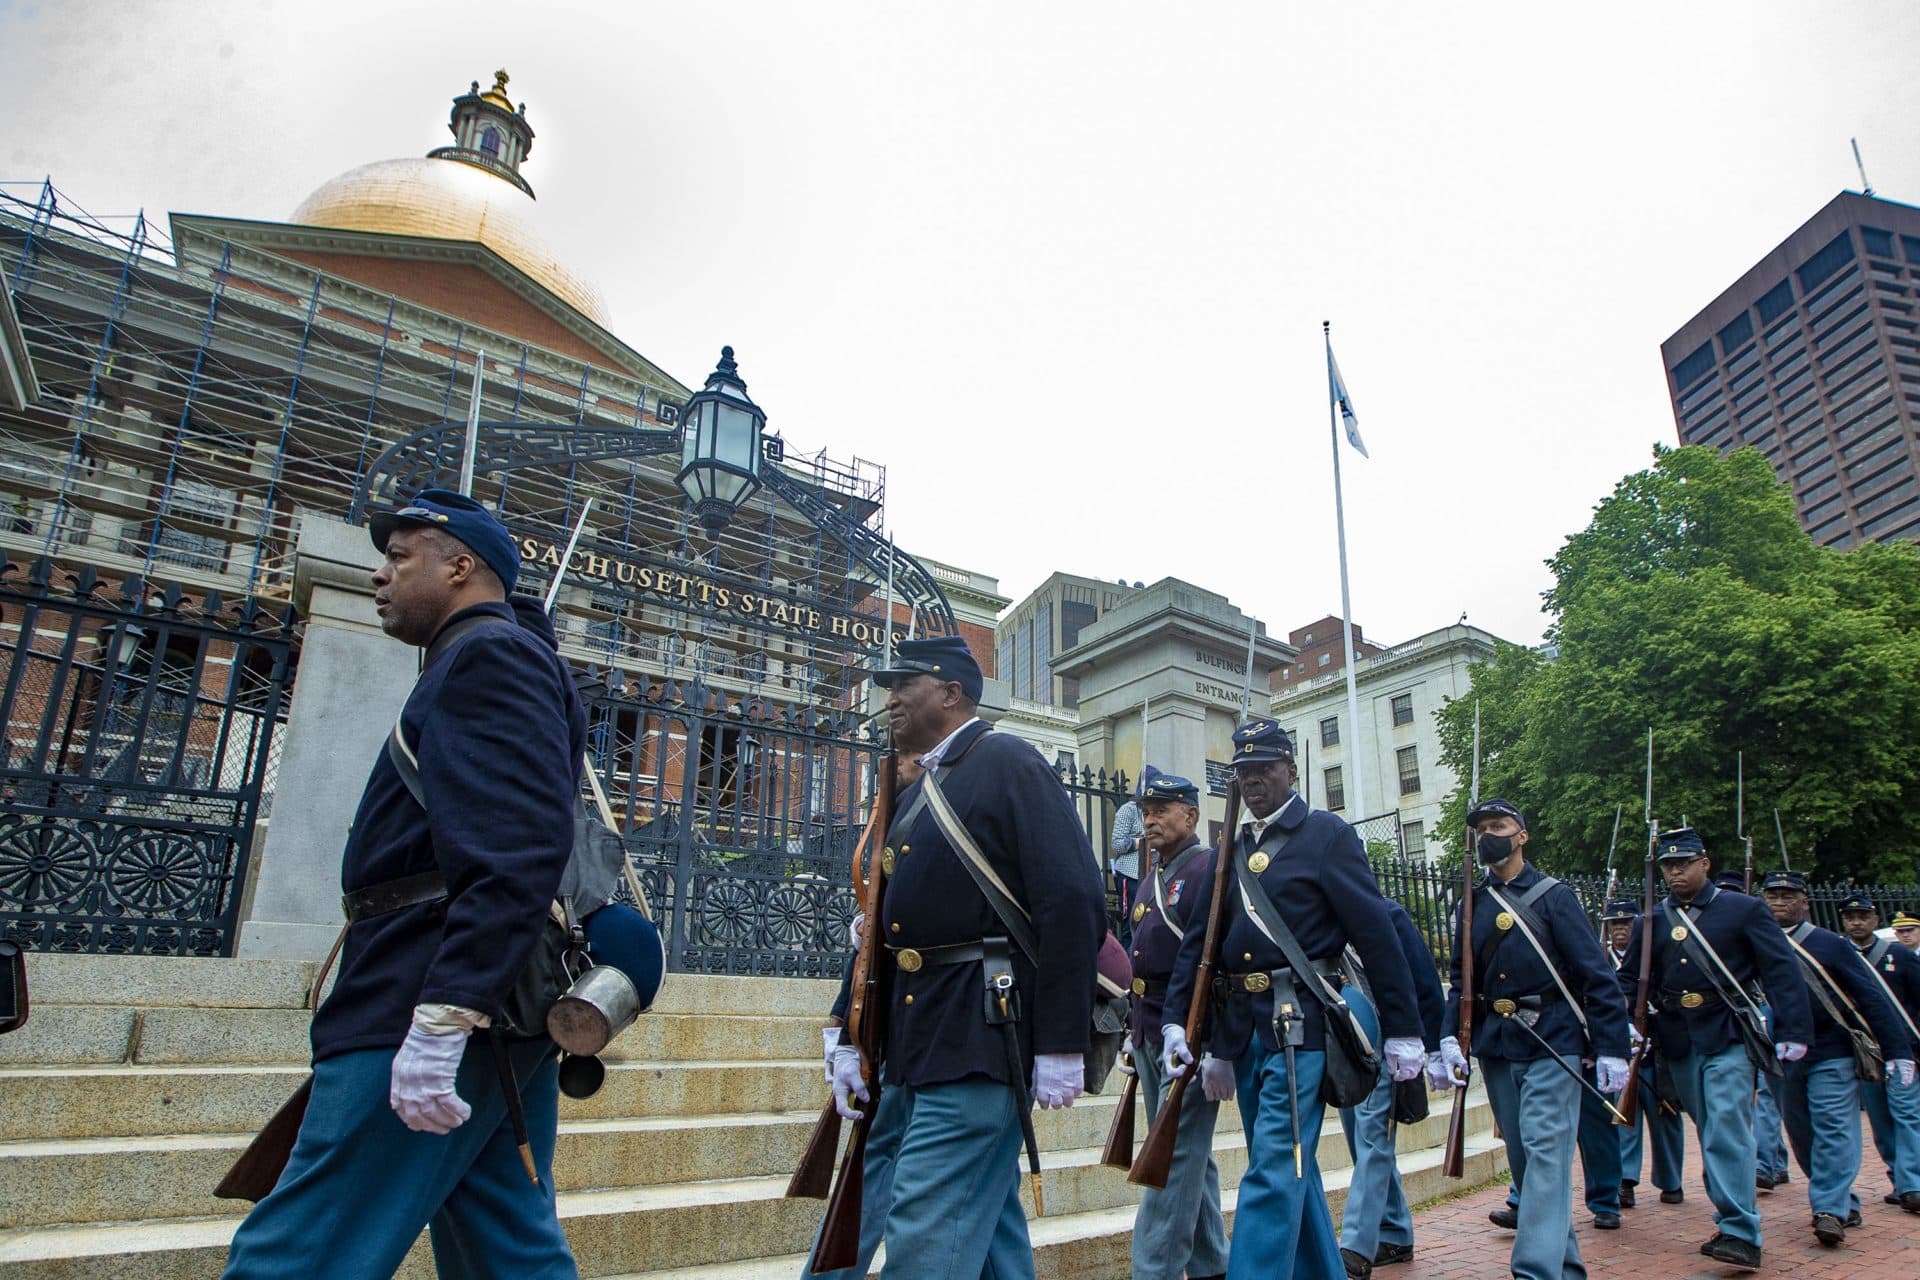 The procession of the 54th Massachusetts Volunteer Regiment marches past the front gates of the State House. (Jesse Costa/WBUR)